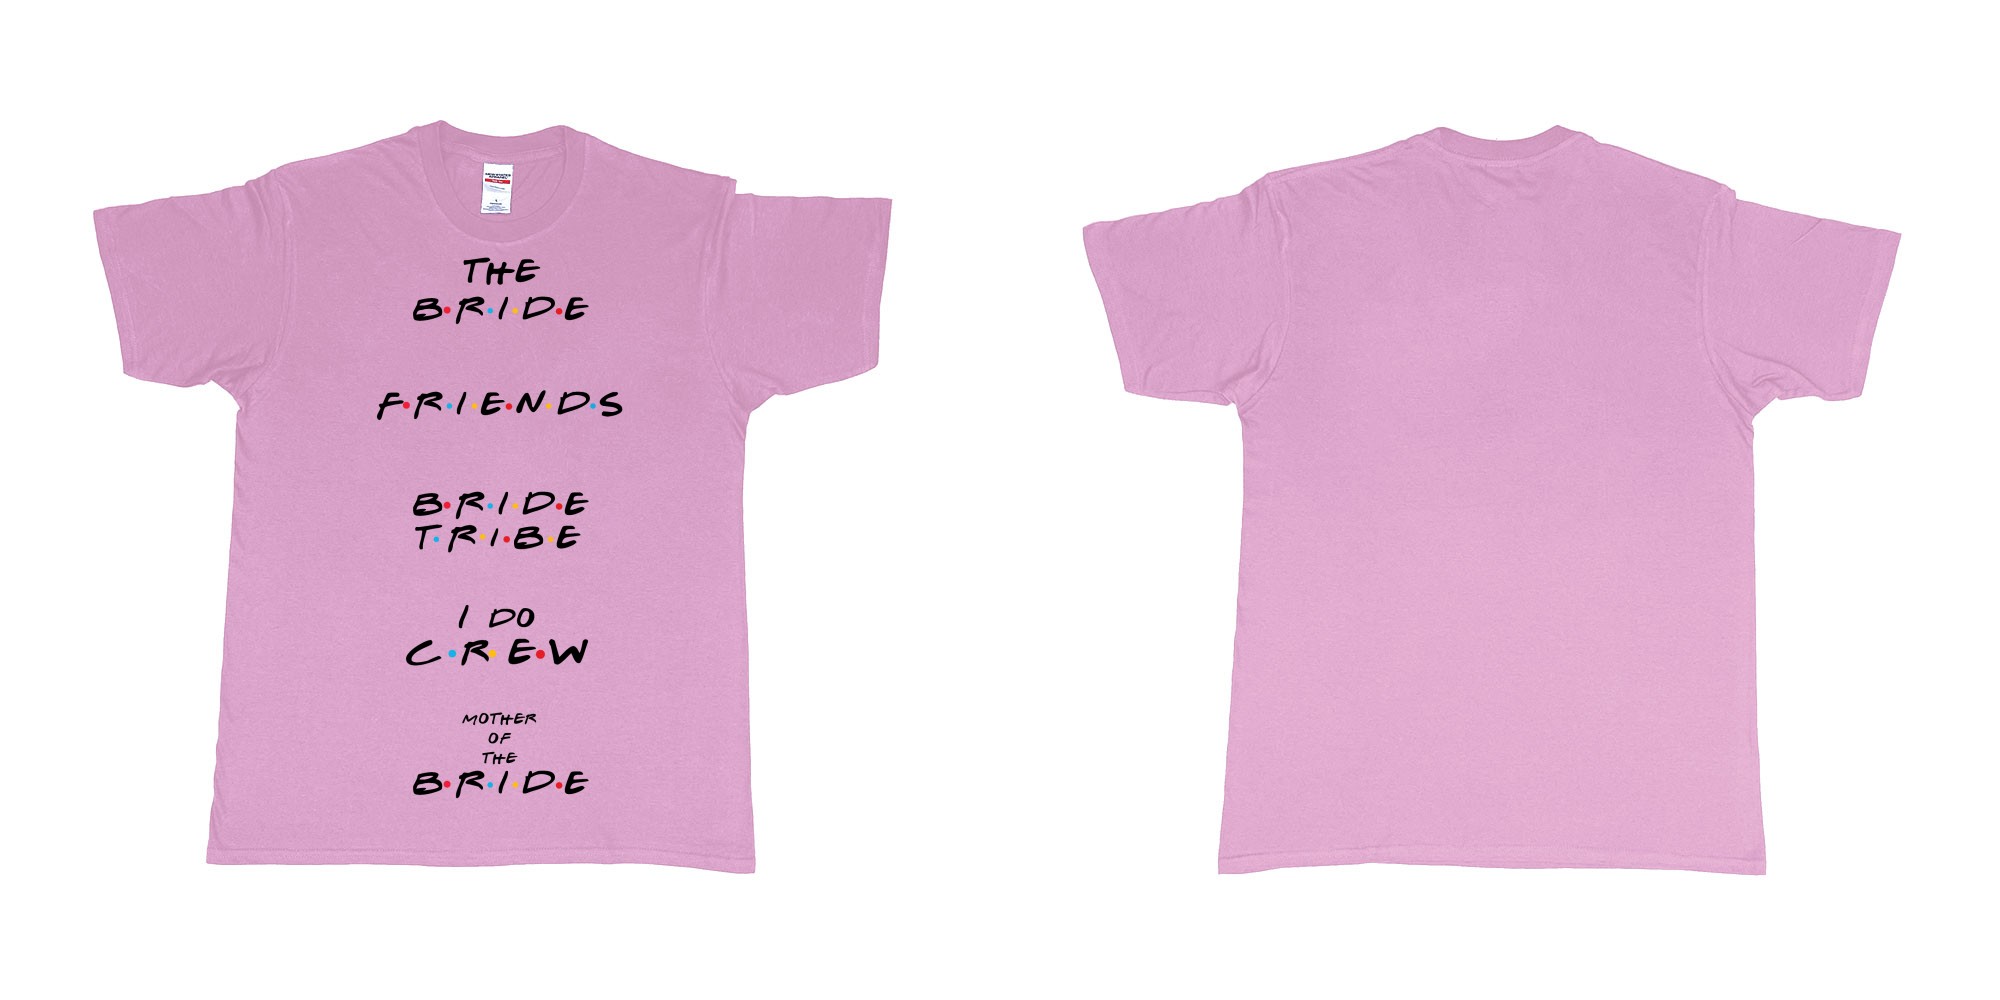 Custom tshirt design TPW friends in fabric color light-pink choice your own text made in Bali by The Pirate Way